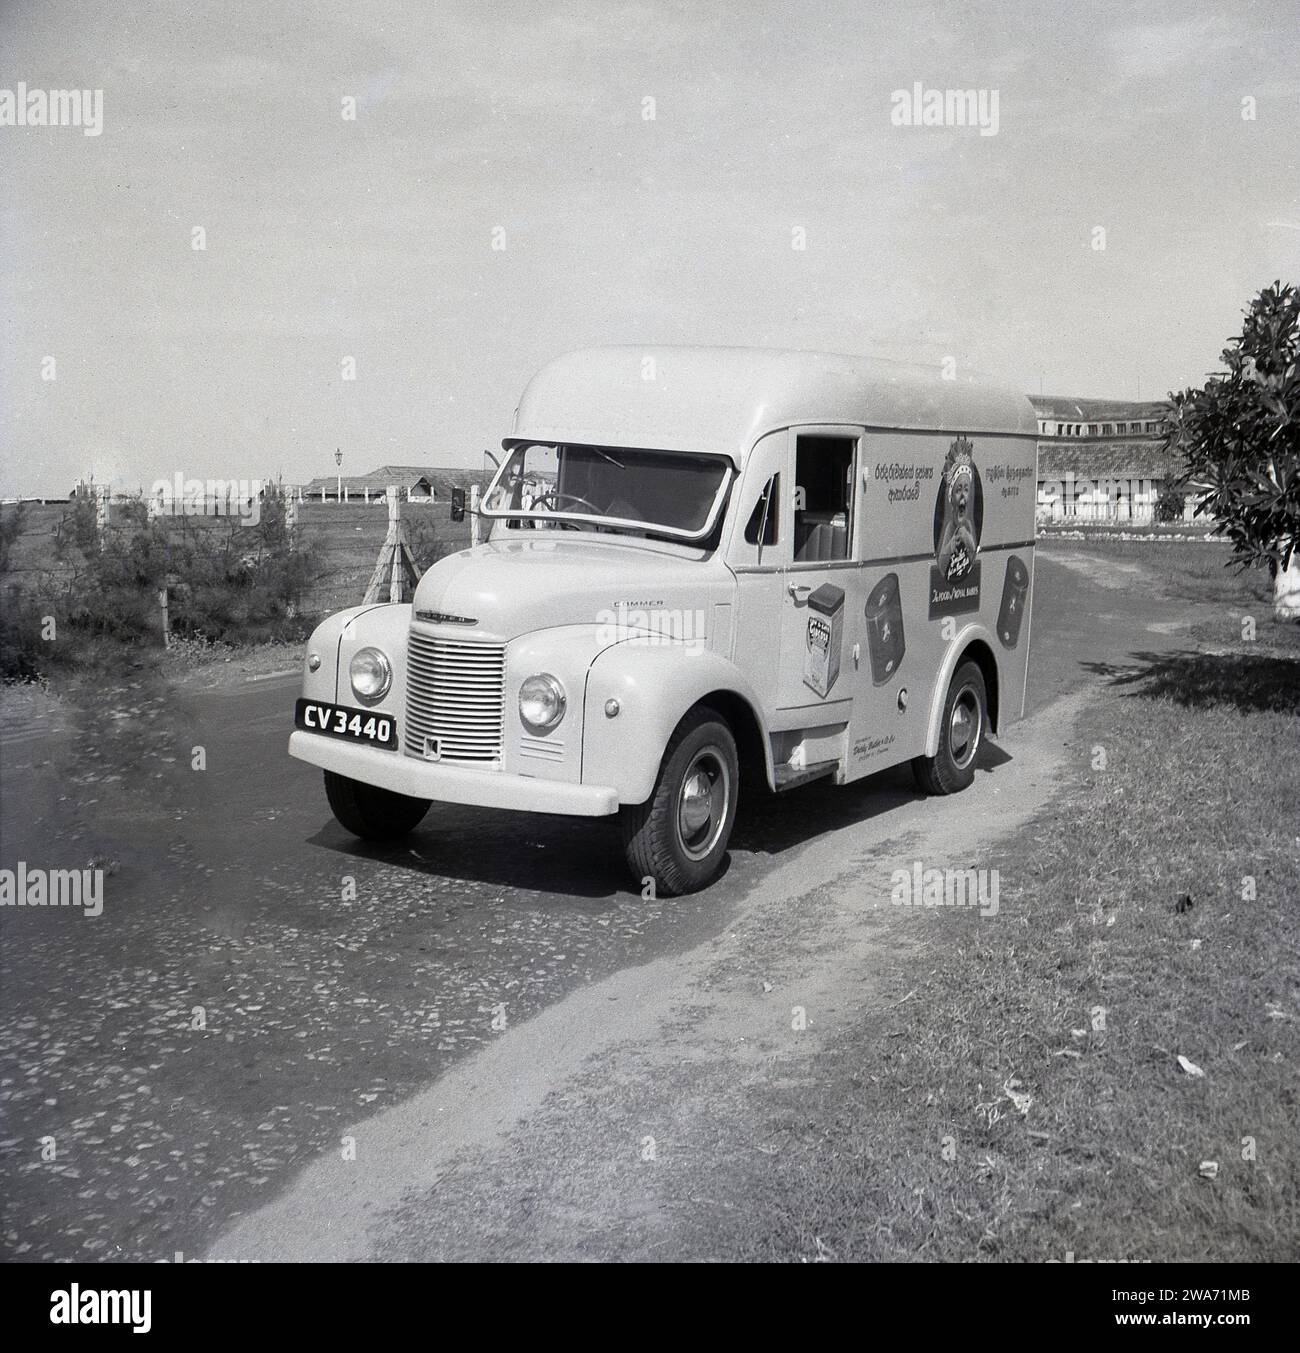 1953, historical, a Commer delivery van on a road in Colombo, Celyon, South Asia. On the side of the van, a smiling baby wearing a crown with the strapline, 'the Food of Royal Babies' and tins of Cow & Gate Milk-Food. Sole Agents: Darley Butler & Co Ltd, Queen St, Colombo. The Cow & Gate 'smiler', a happy, healthy looking baby, first appeared on product packaging & adverts in the 1930s. The 'Royal Baby; with a crown on its head dates back to 1937 and the Coronation of Briitsh King George VI, when the English diary company began to use 'royal association' to endorse their baby milk formula. Stock Photo